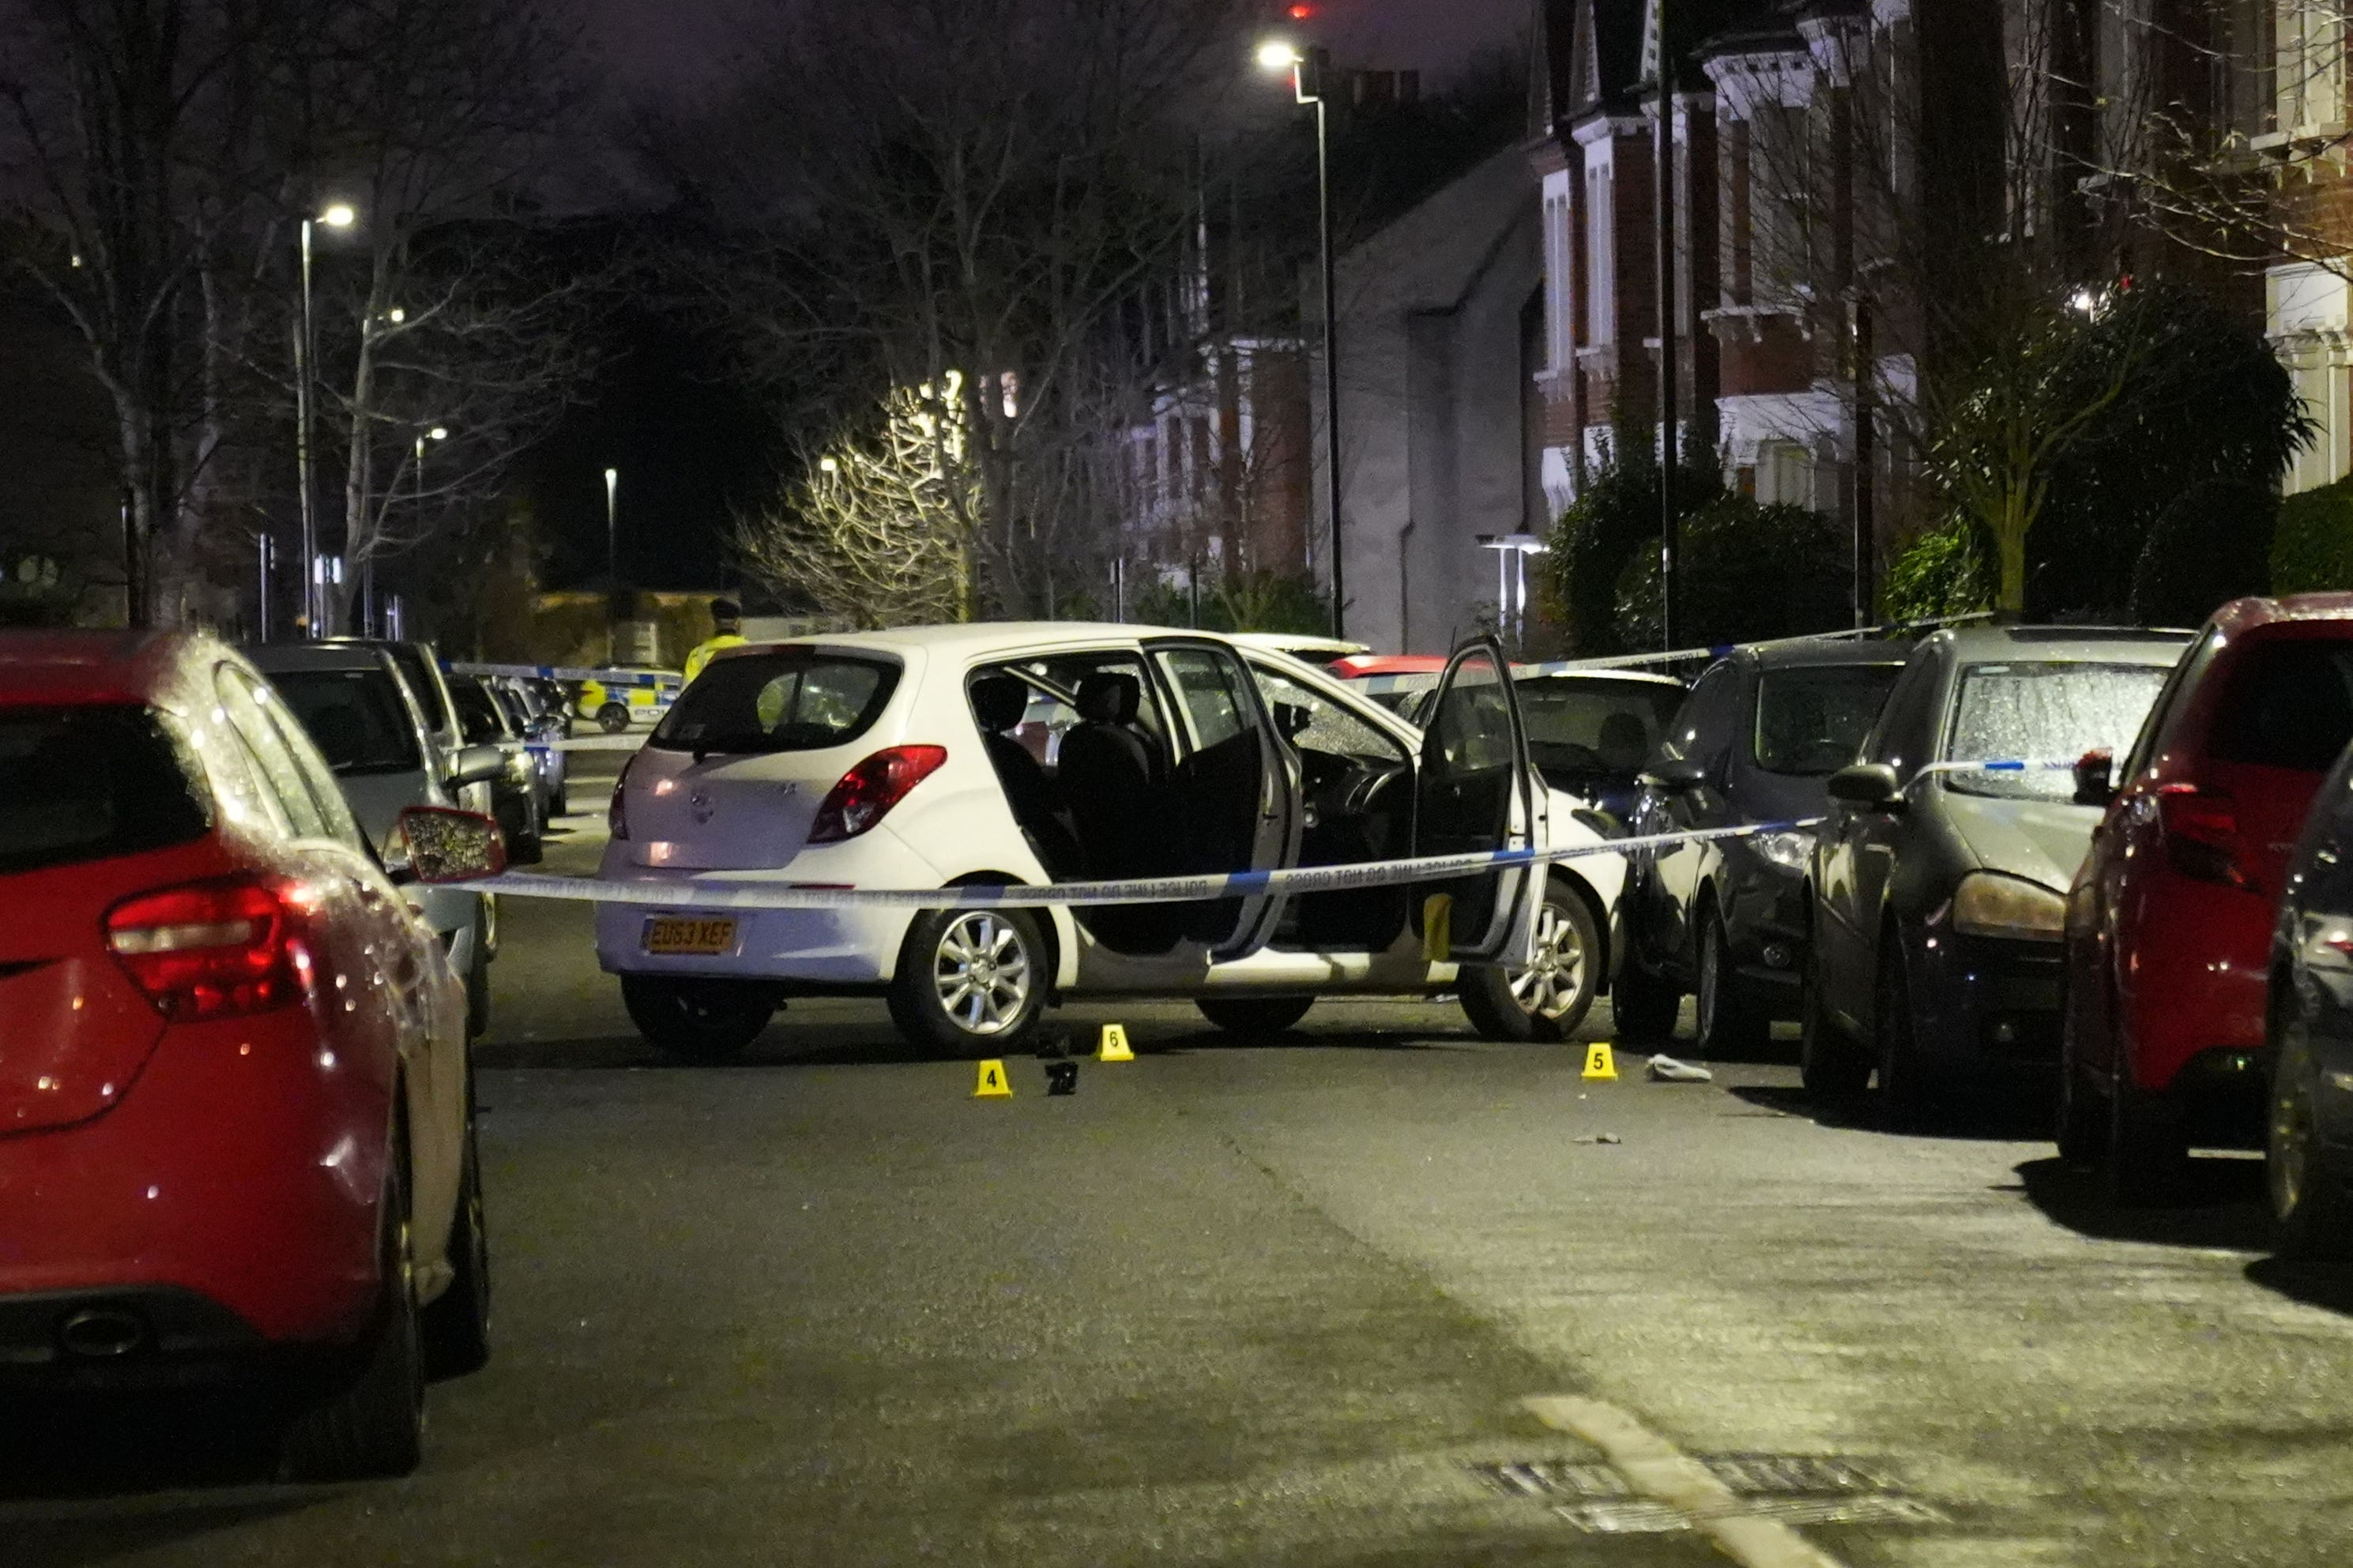 Police at the scene of the attack in Lessar Avenue near Clapham Common